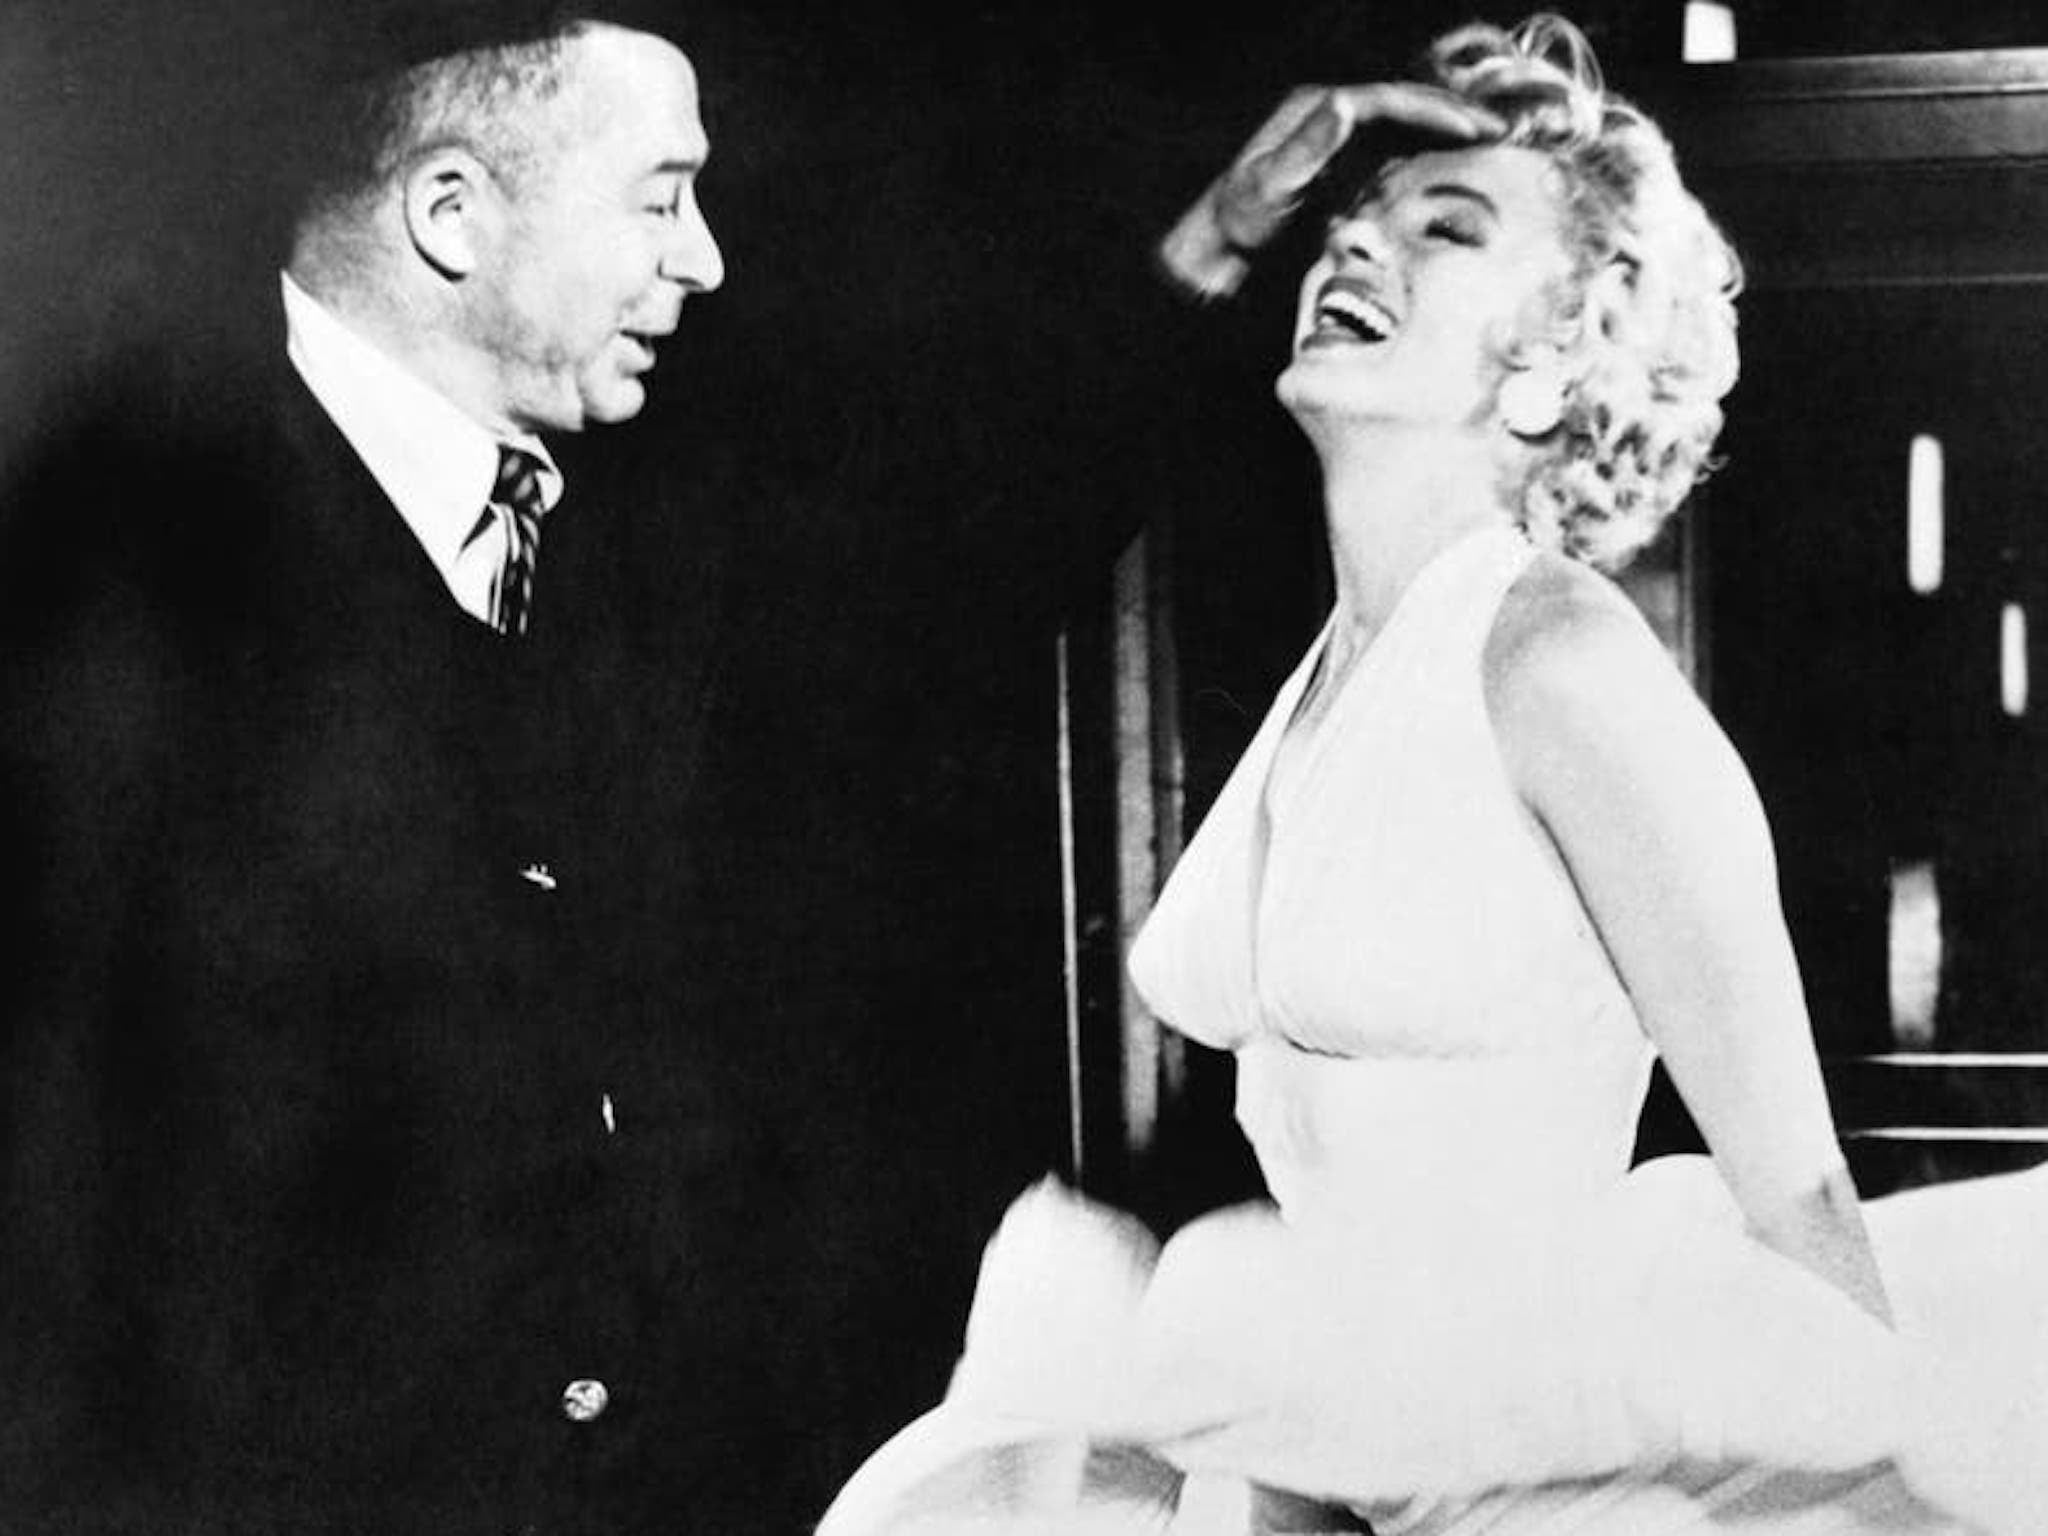 Billy Wilder and Marilyn Monroe, whose skirt is being blown up by a fan, on the set of his romantic comedy ‘The Seven Year Itch’ in 1955